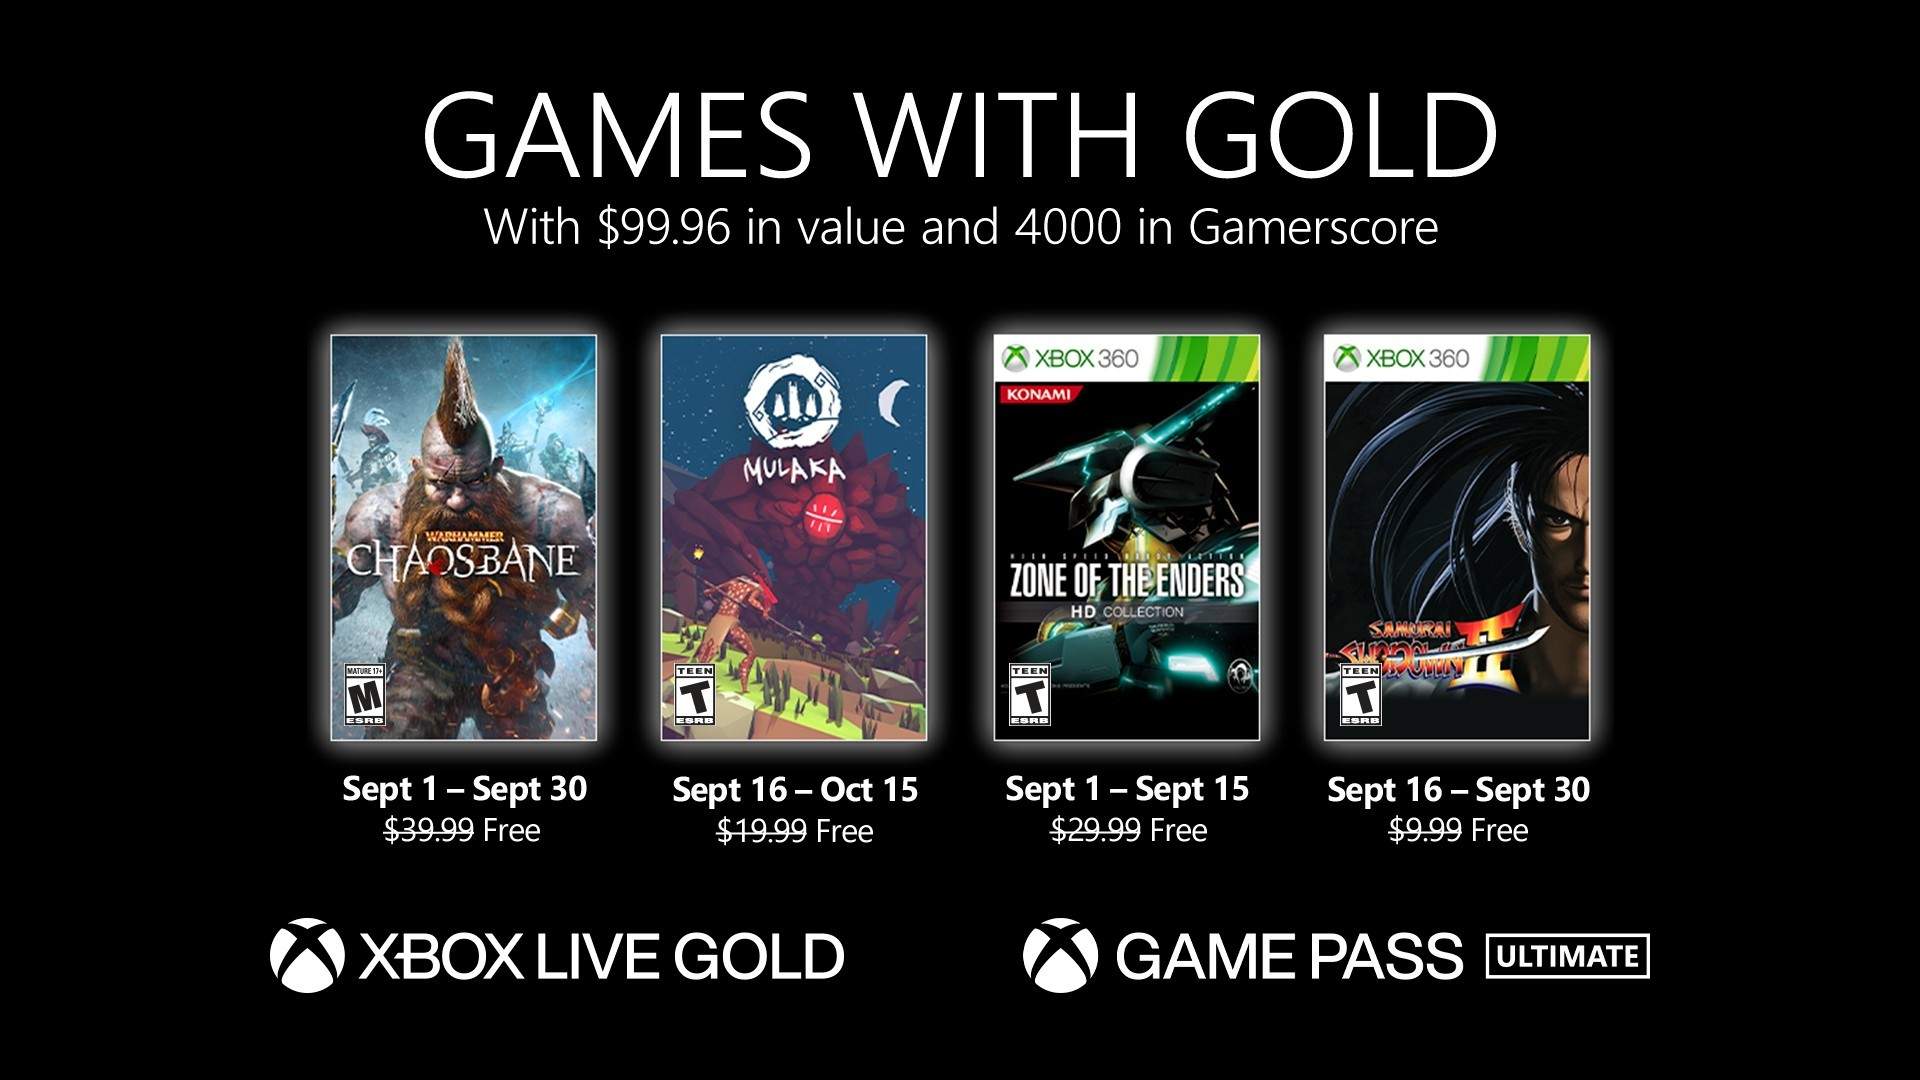 Xbox games with Gold Sept 2021